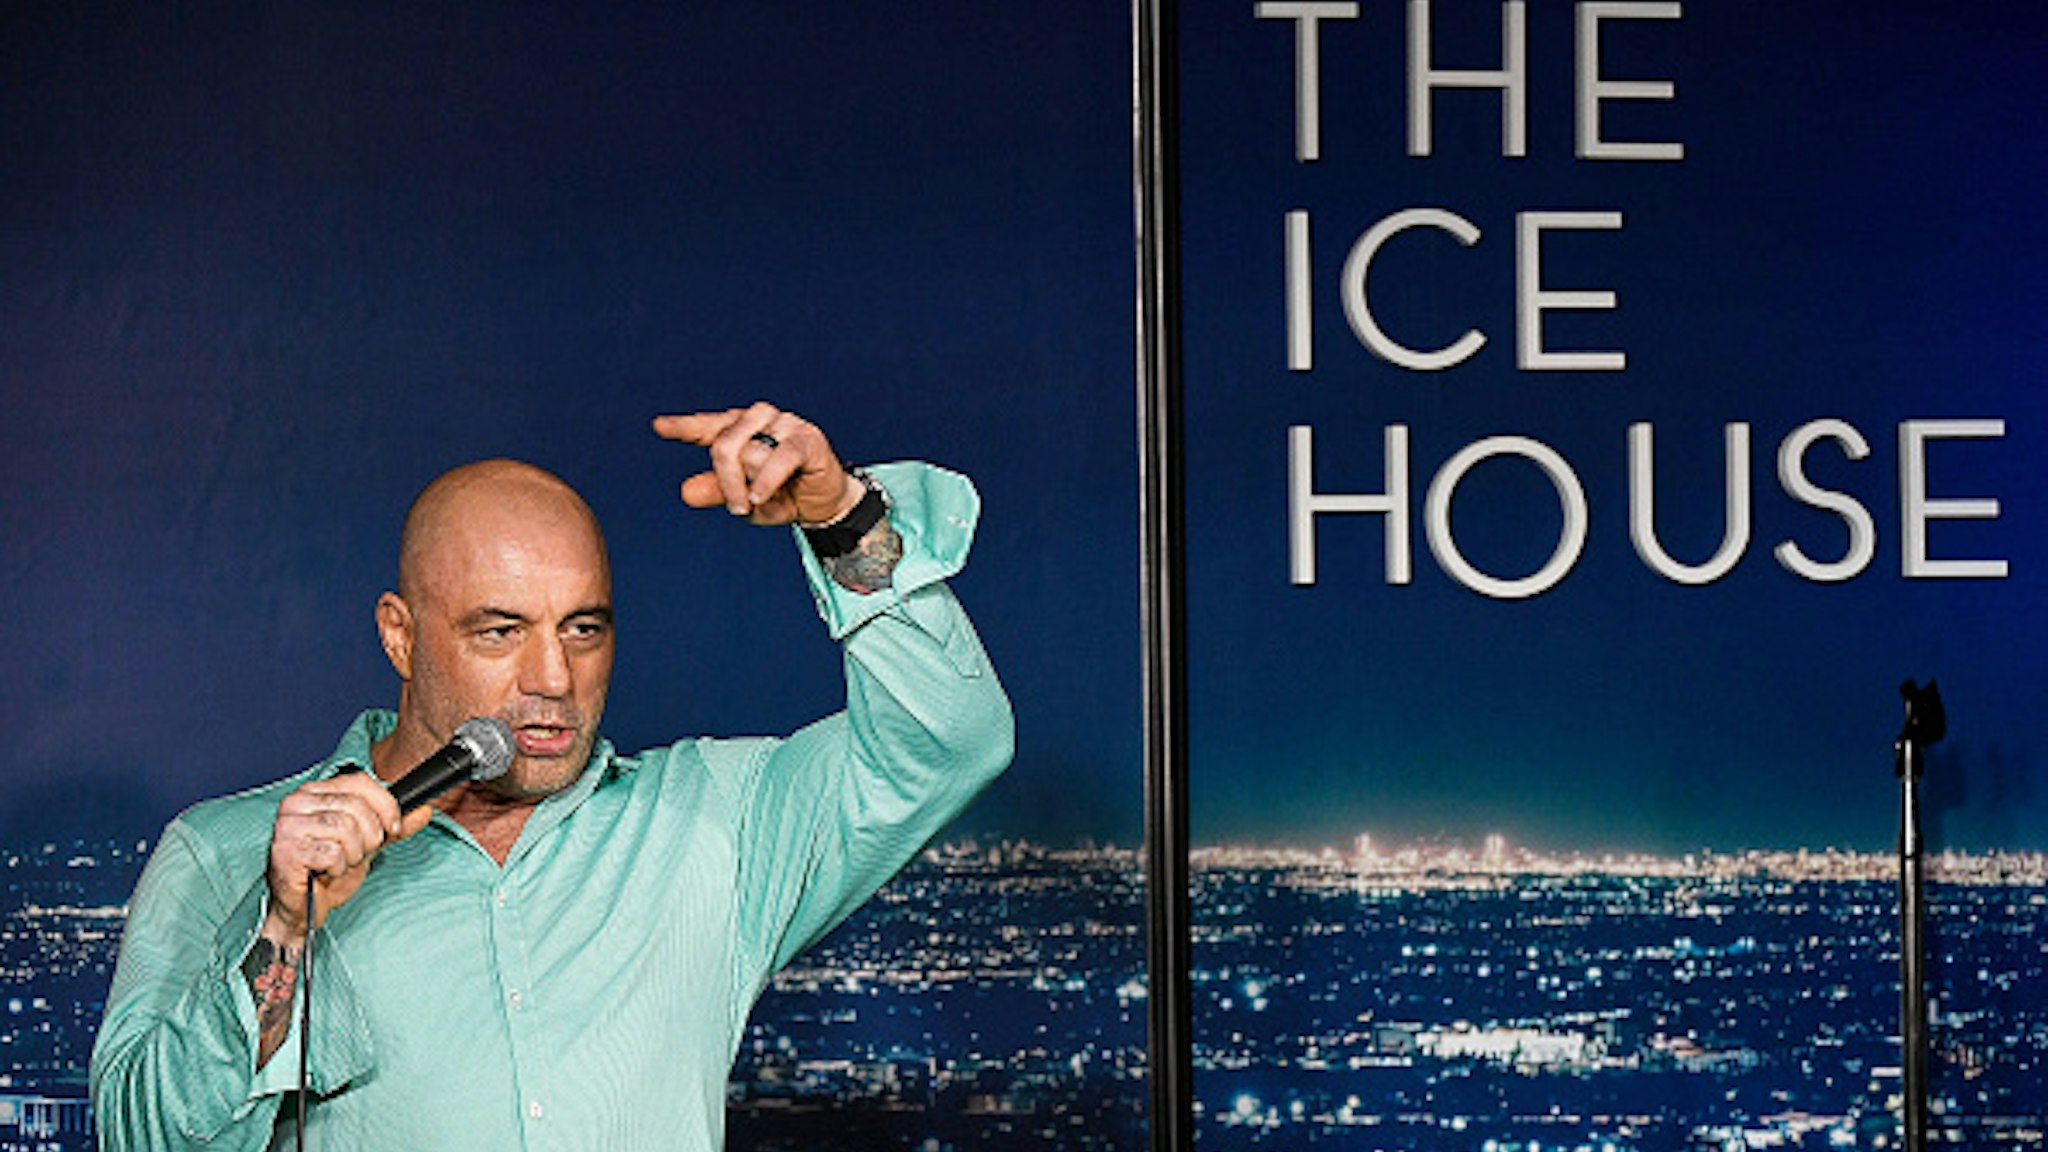 PASADENA, CA - MARCH 15: Comedian Joe Rogan performs during his appearance at The Ice House Comedy Club on March 15, 2019 in Pasadena, California.